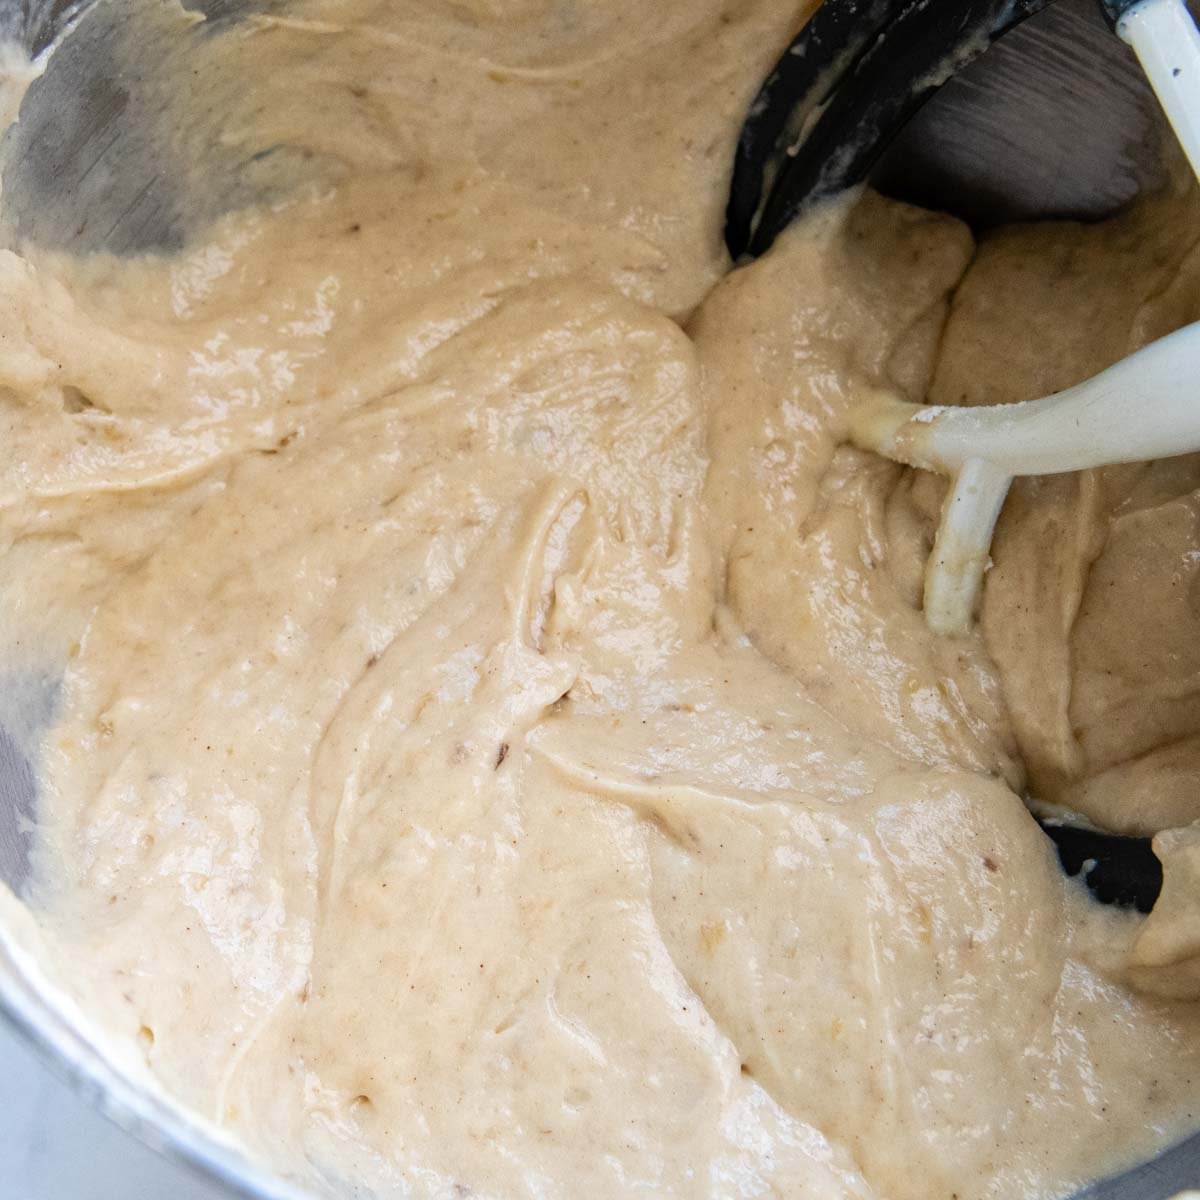 cake batter after mixing in all the ingredients.